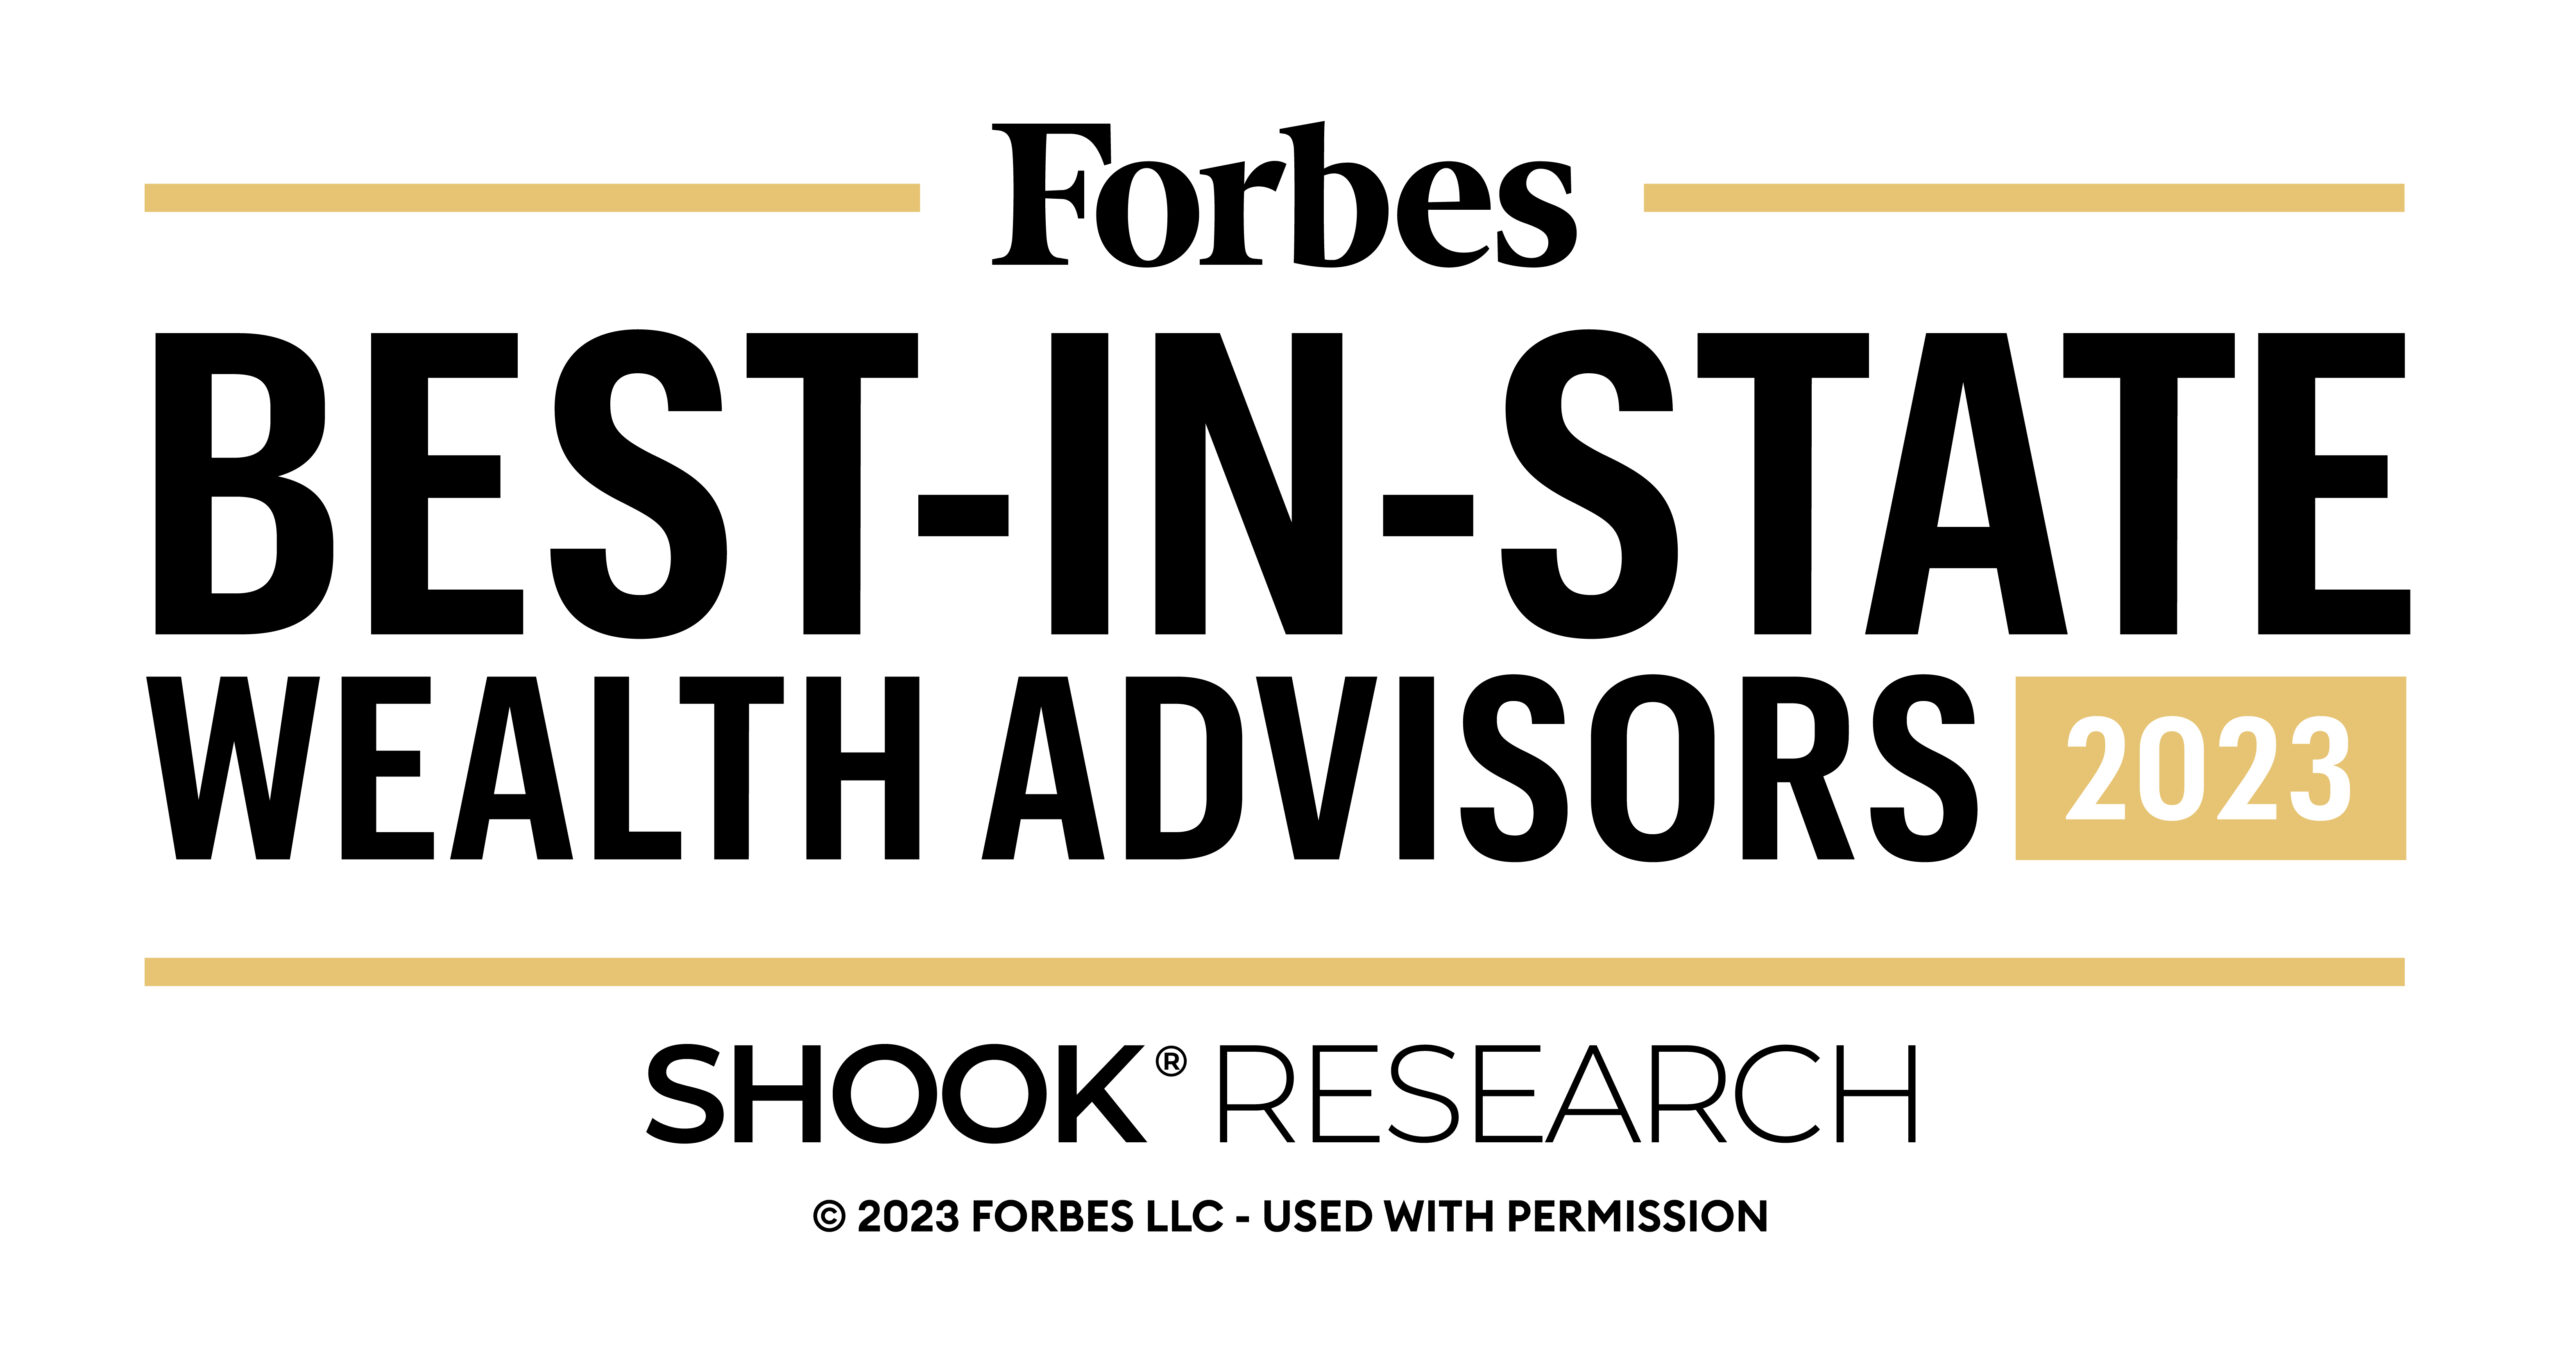 Forbes: Best in state wealth advisors 2023